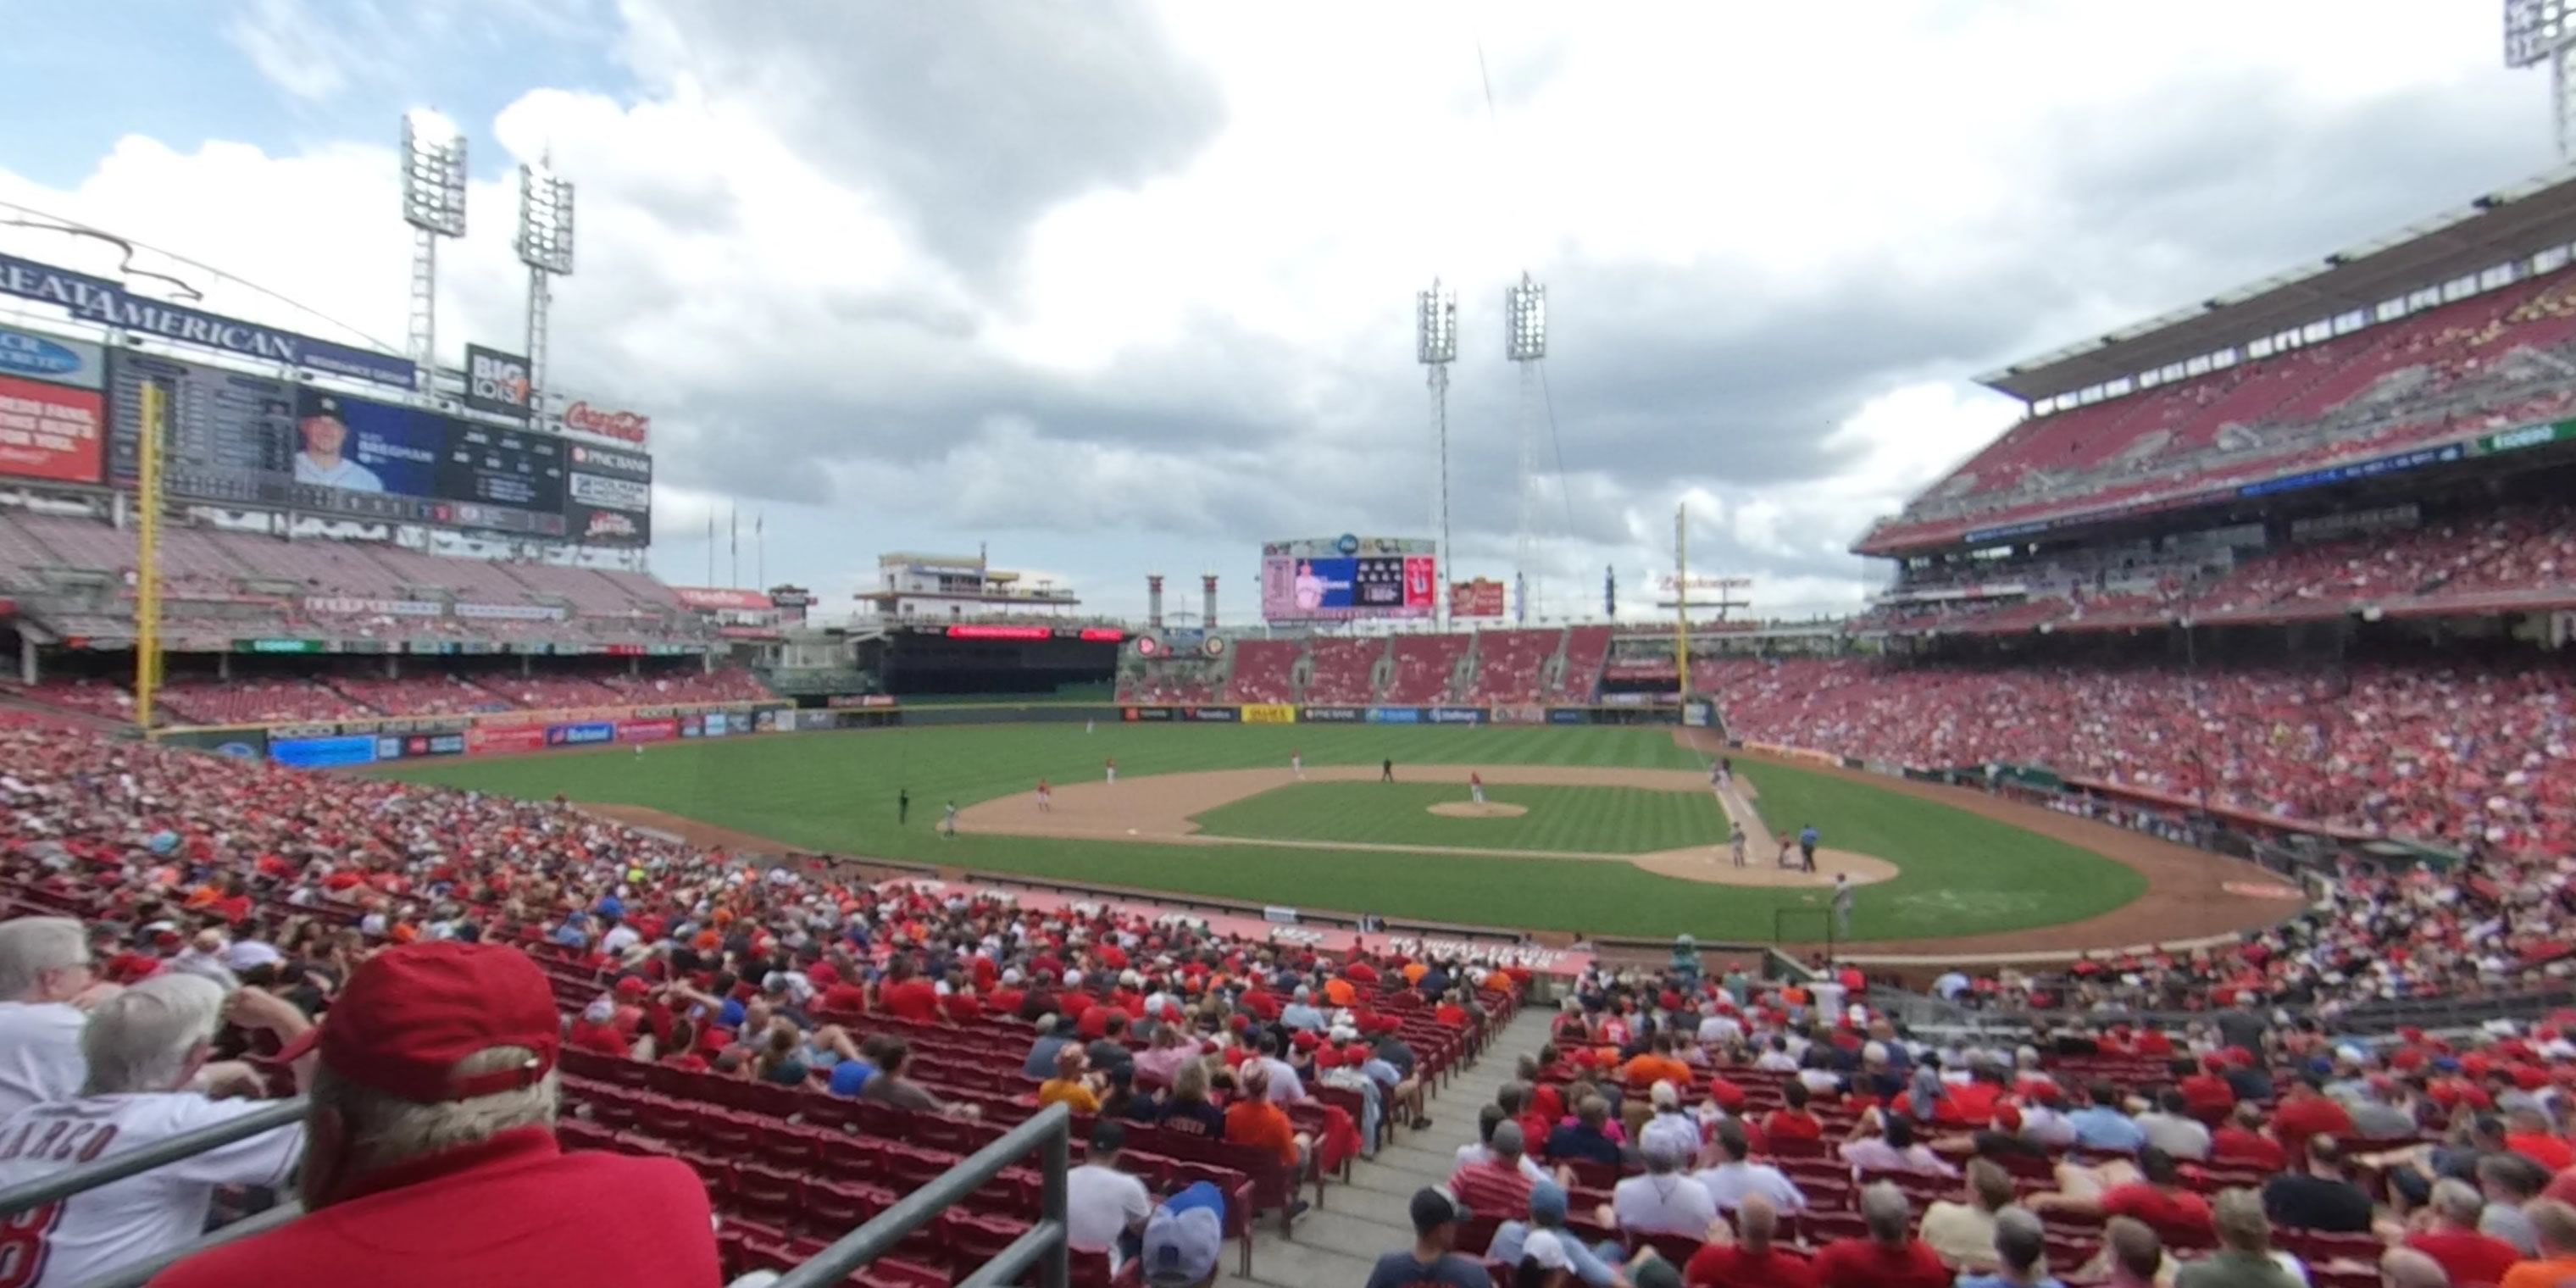 Section 119 at Great American Ball Park 